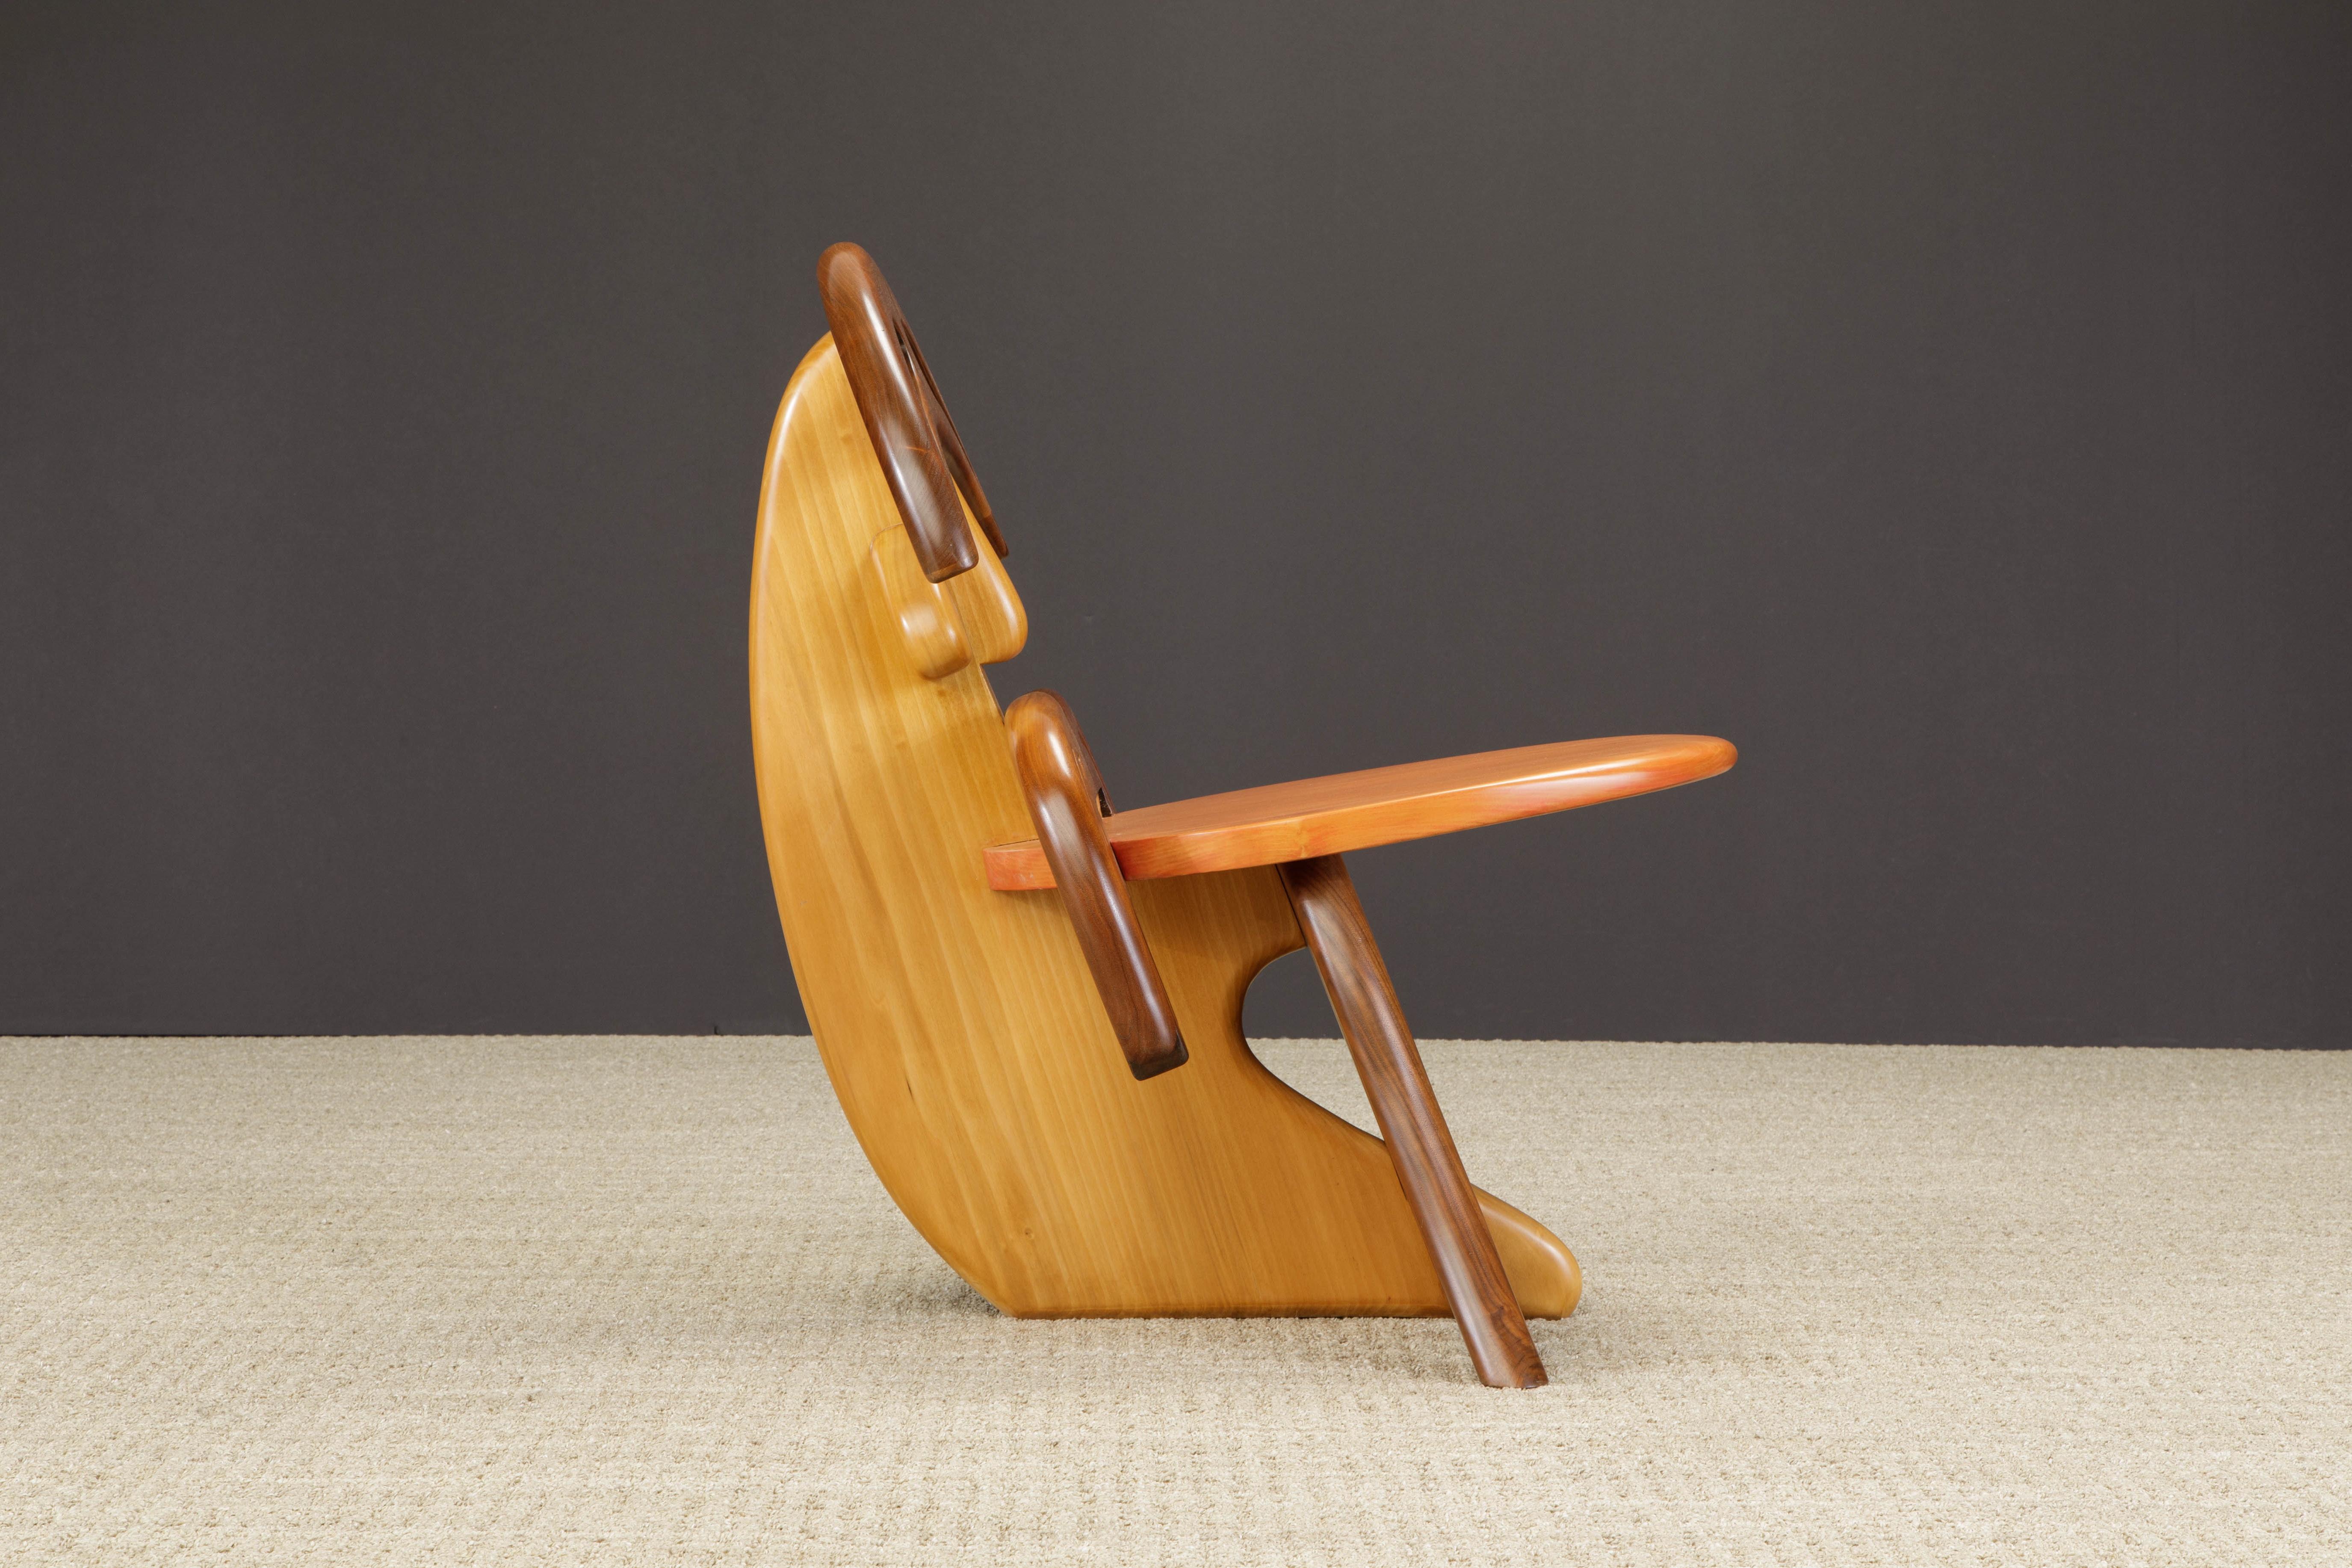 Wood Alan Siegel Post-Modern Craftsman 'Tongue' Chair, Signed & Dated 1981  For Sale